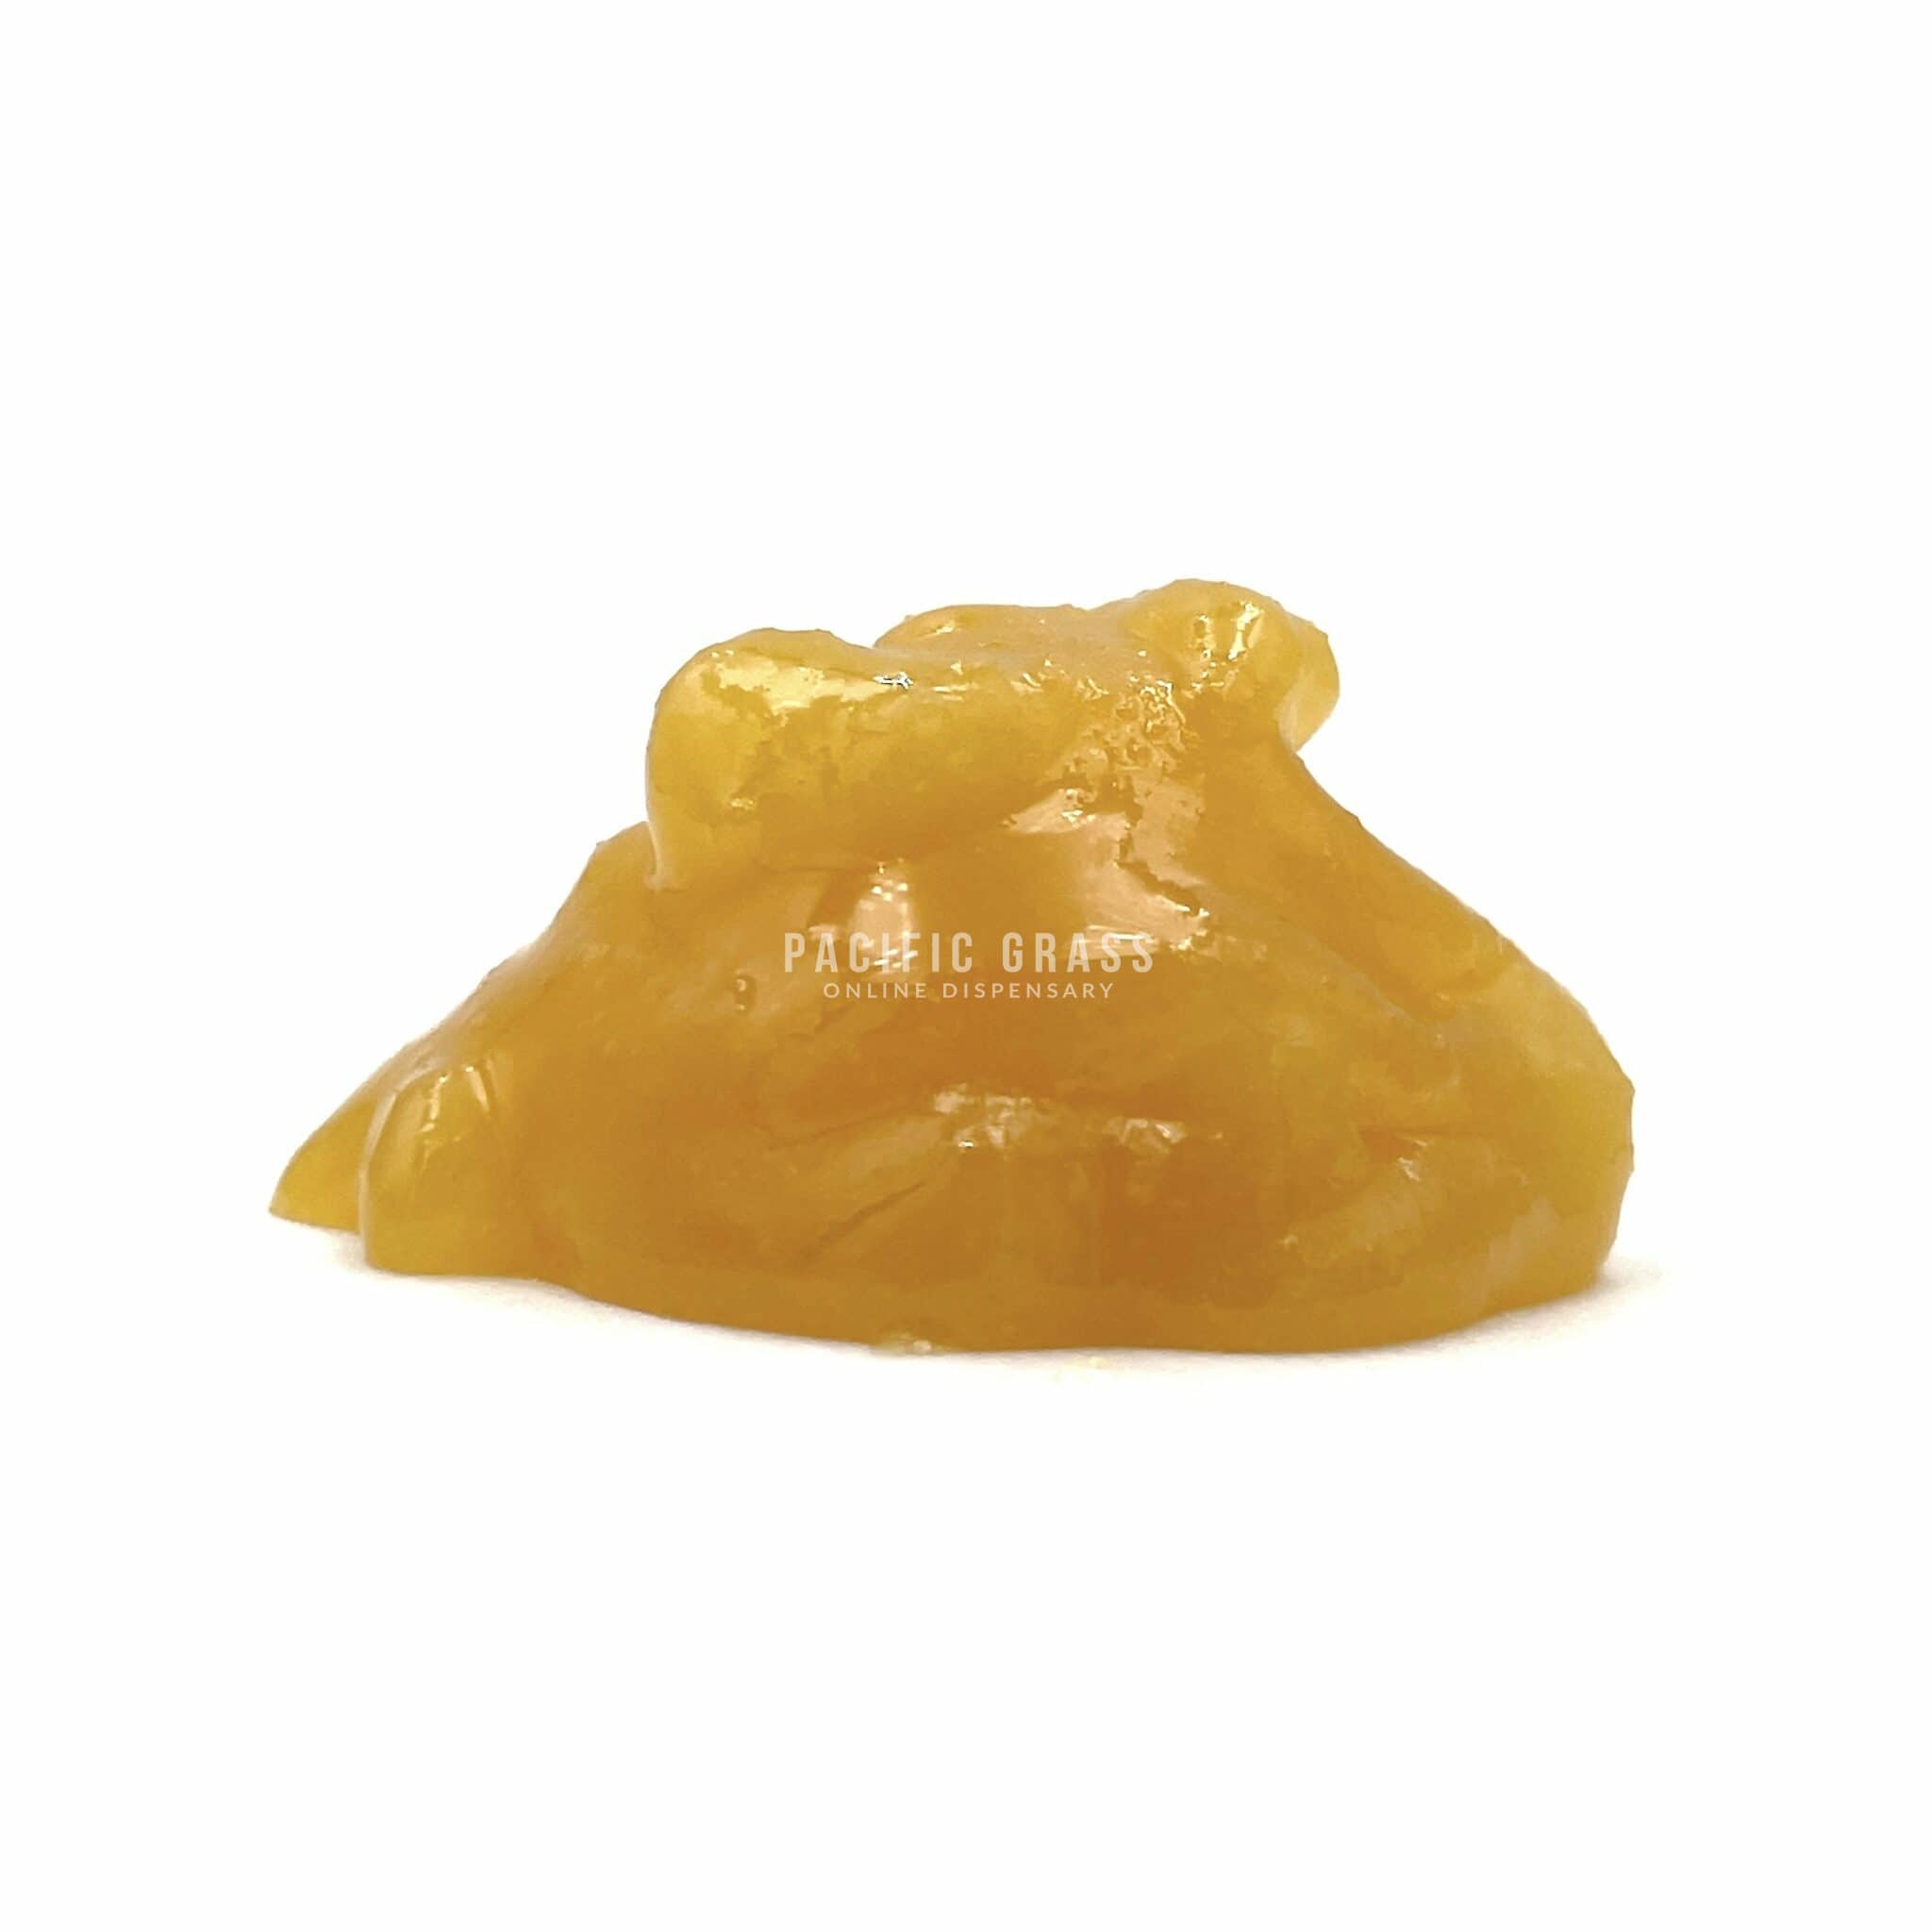 Live resin – red congolese